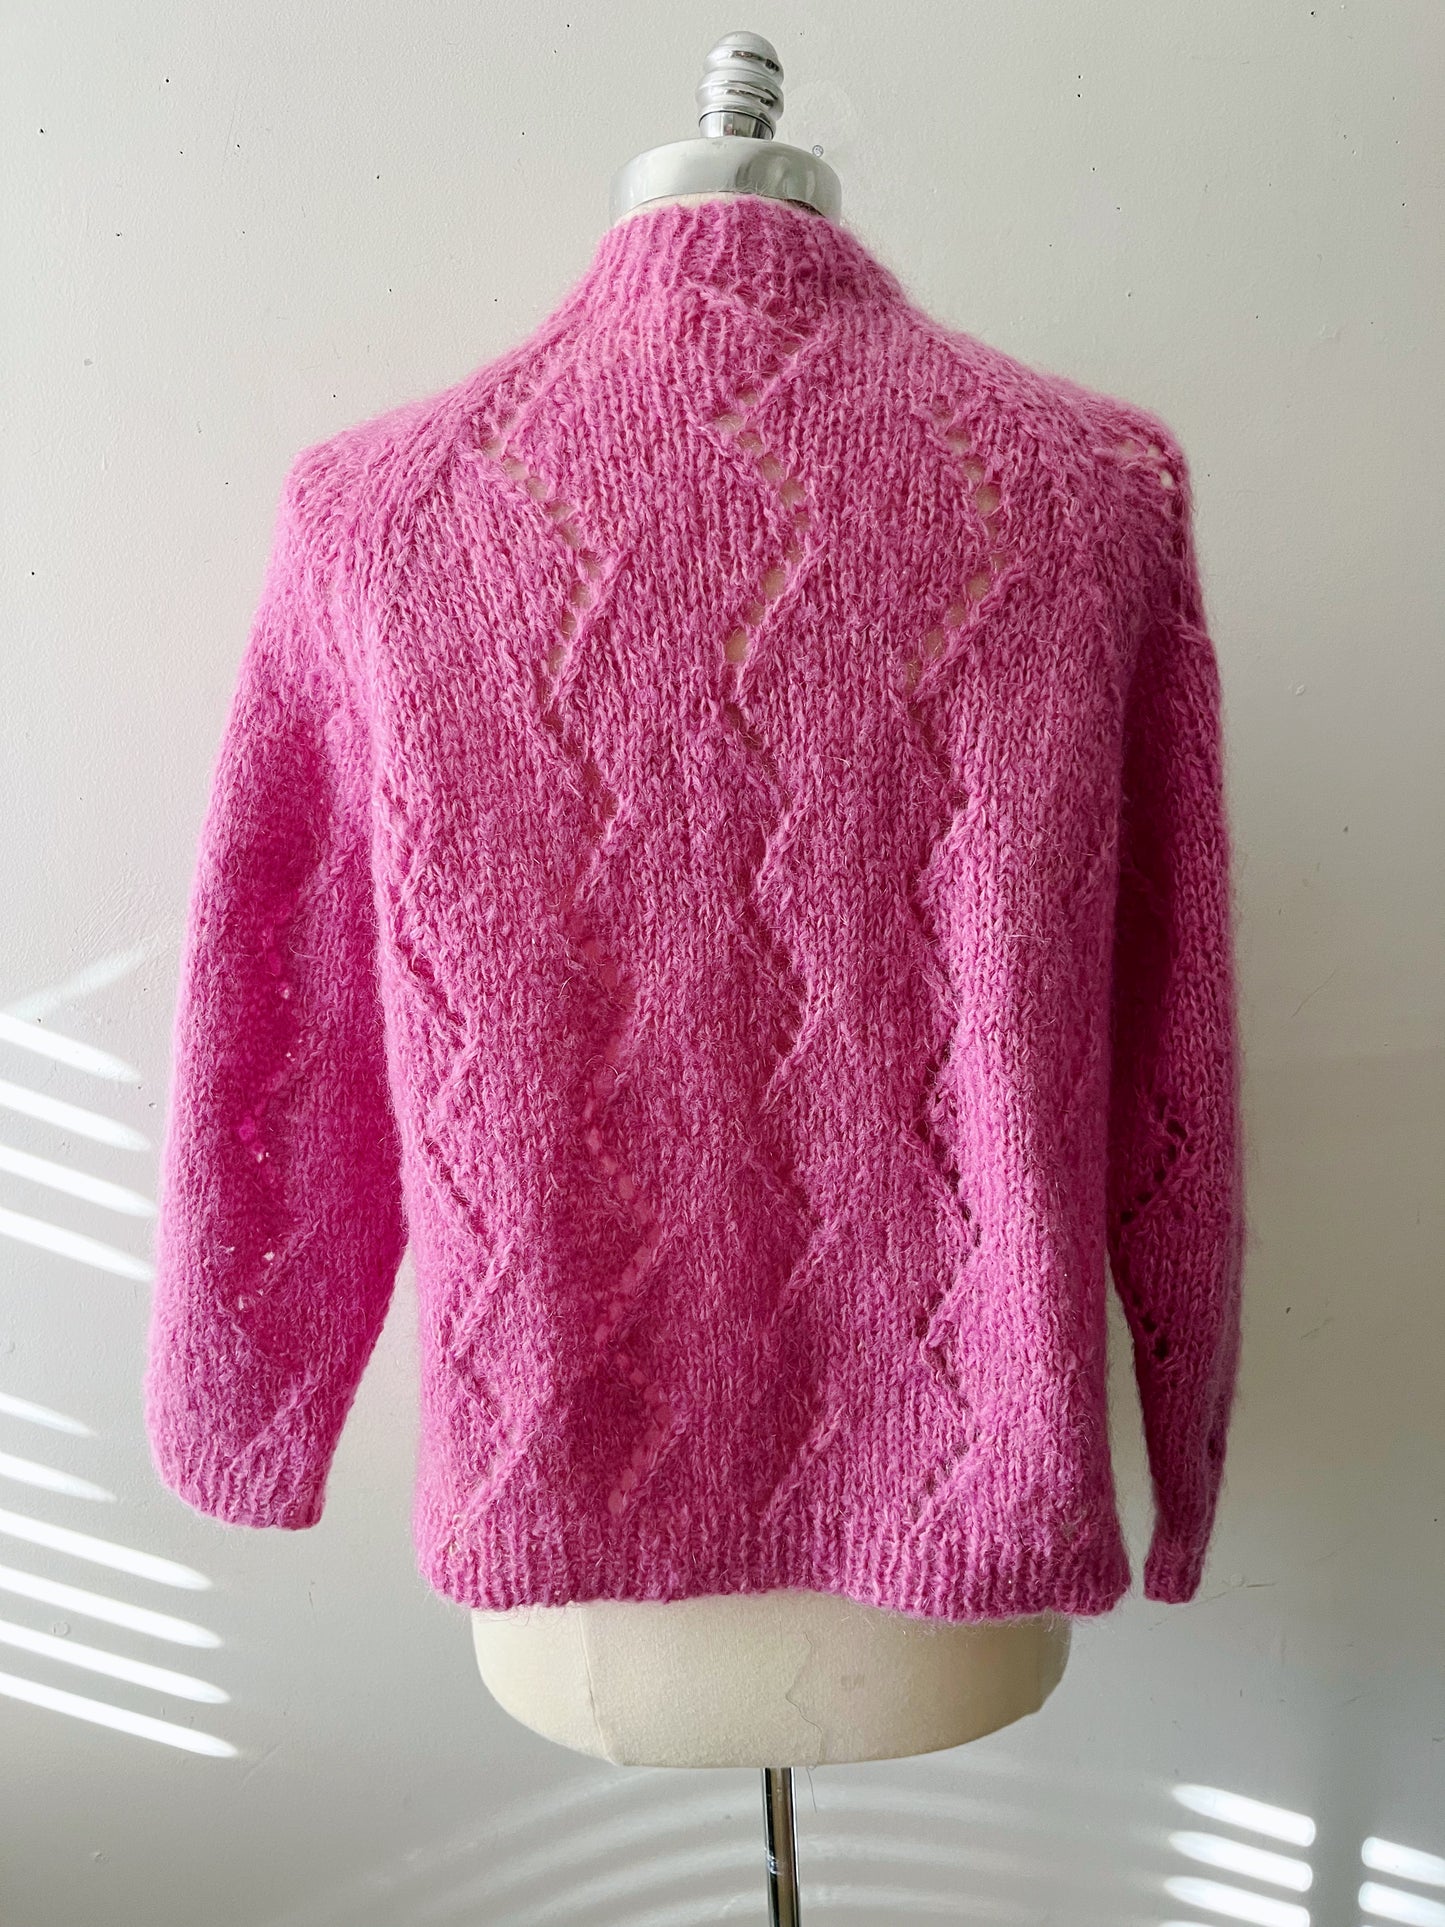 Violet hand knit cardigan sweater